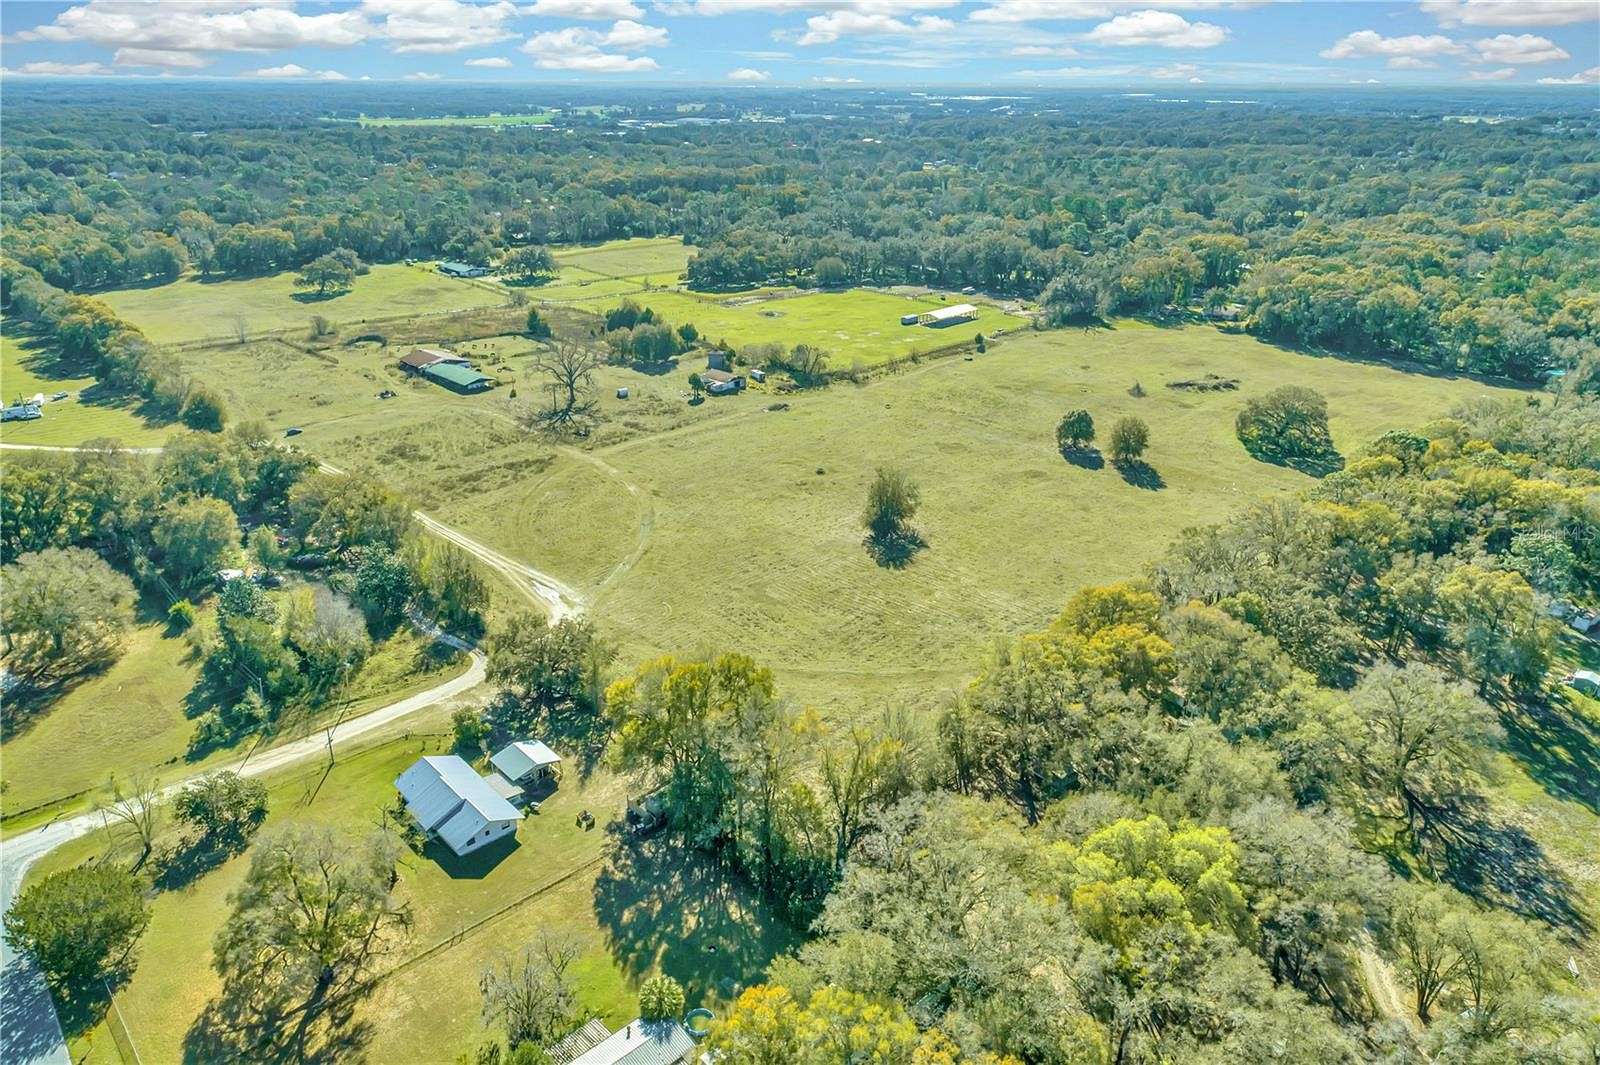 70 Acres of Land for Sale in Ocala, Florida